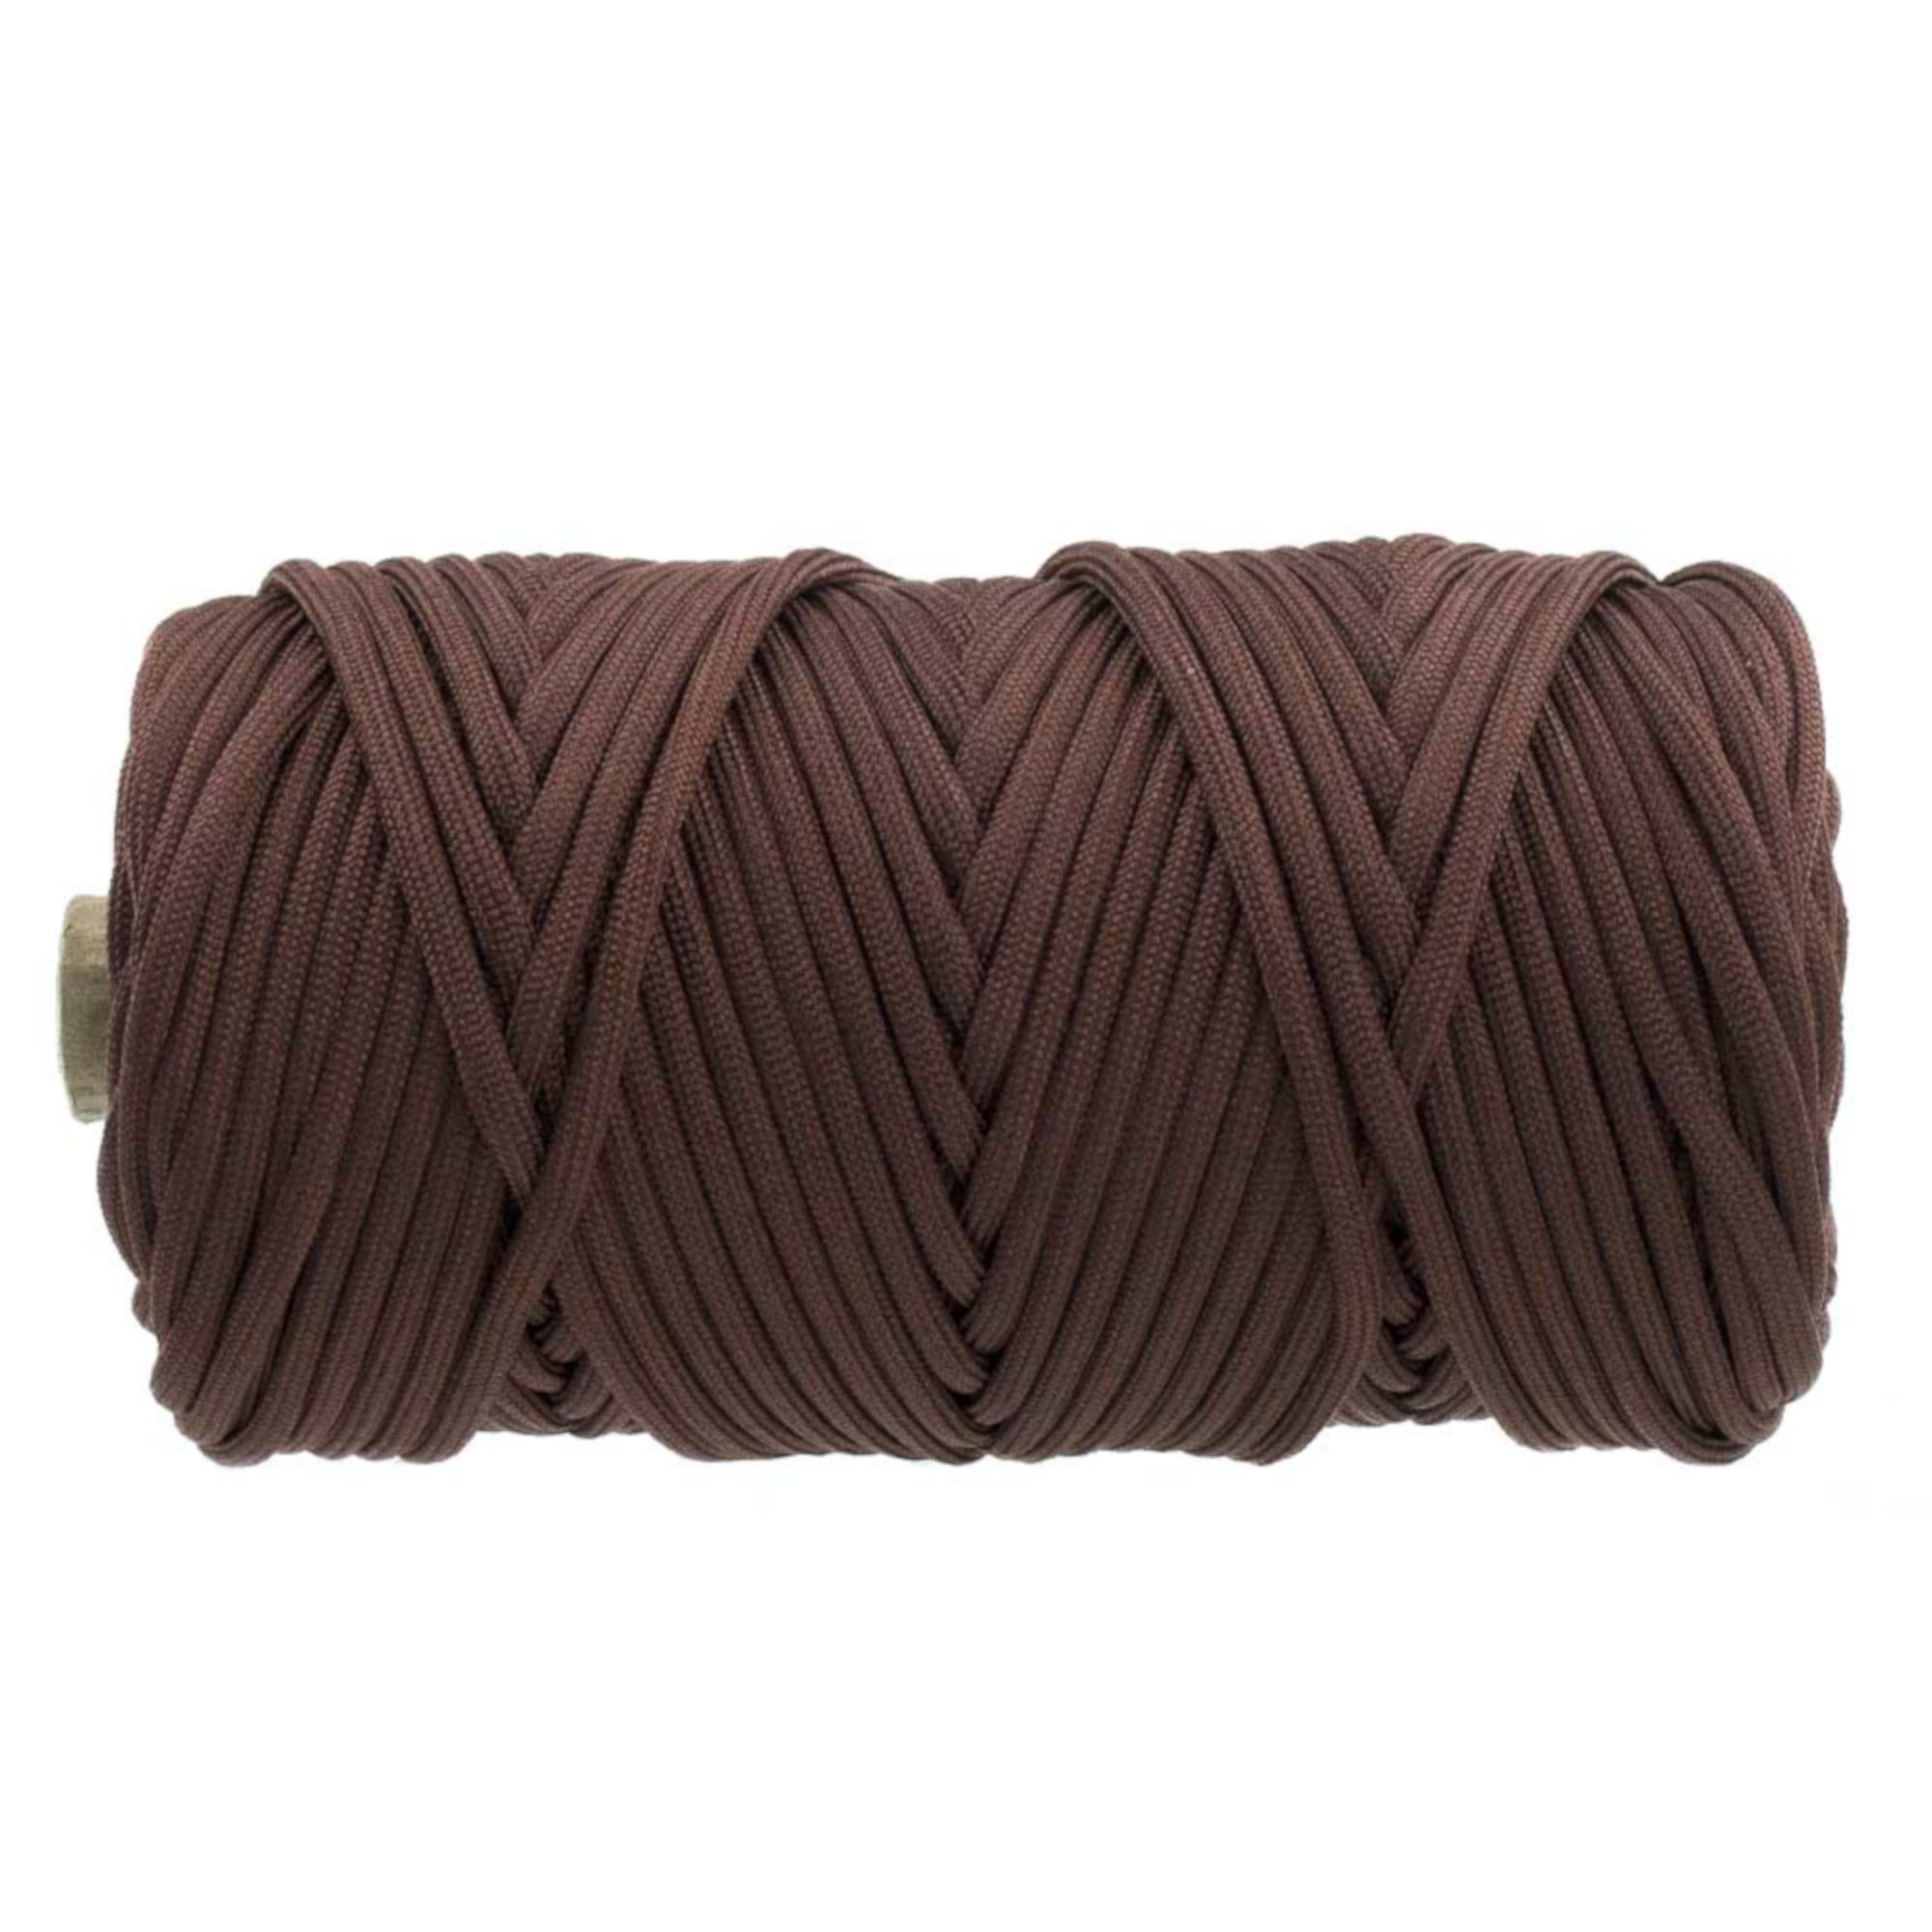 TECEUM Paracord Type IV 750 lb Uabite 100% Nylon –Strong Tactical MIL–SPEC Parachute Cord –Survival Rope Emergency para Cord –EDC Camping Hiking Military Gear 4mm 320a 100 ft 